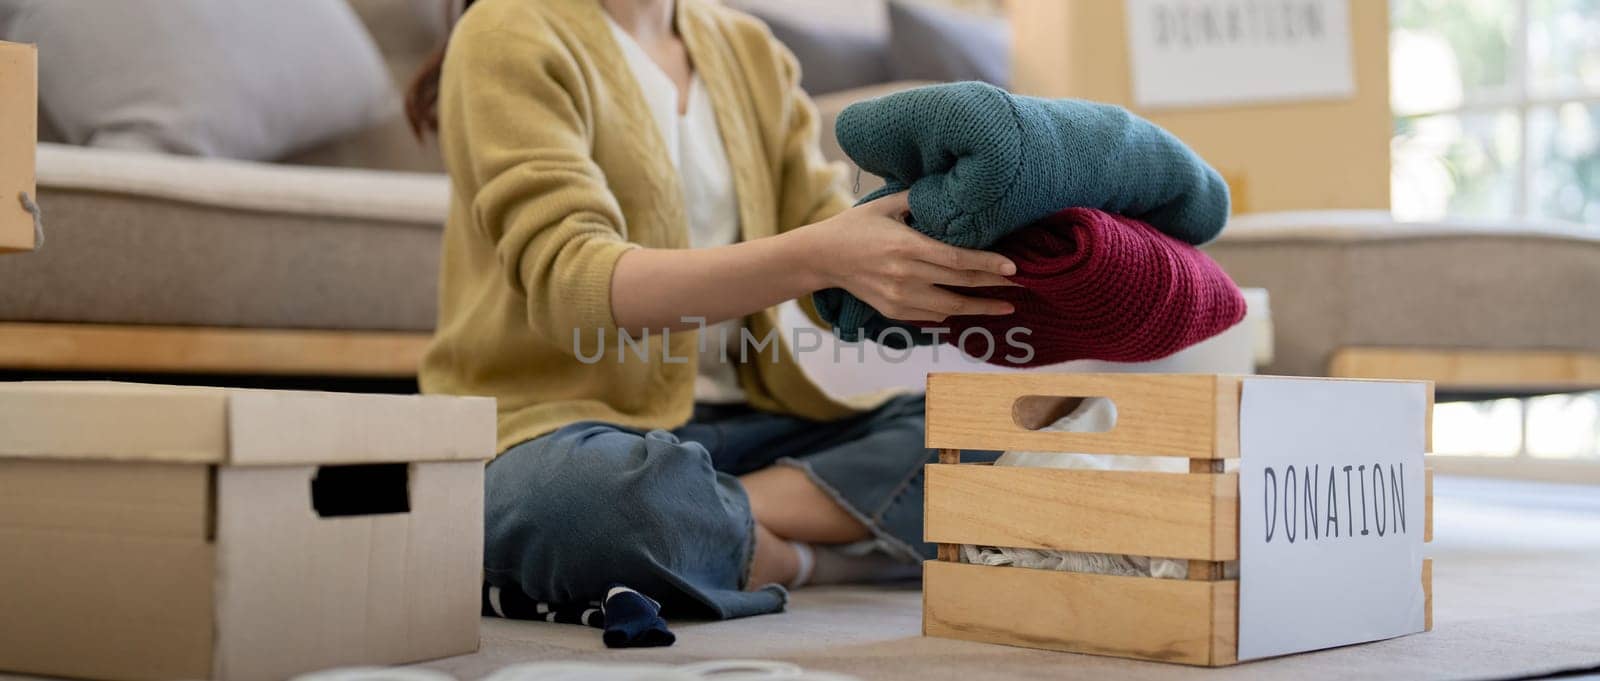 Donation, asian young woman sitting pack object at home, putting on stuff into donate box with second hand clothes, charity helping and needy people. Reuse recycle.